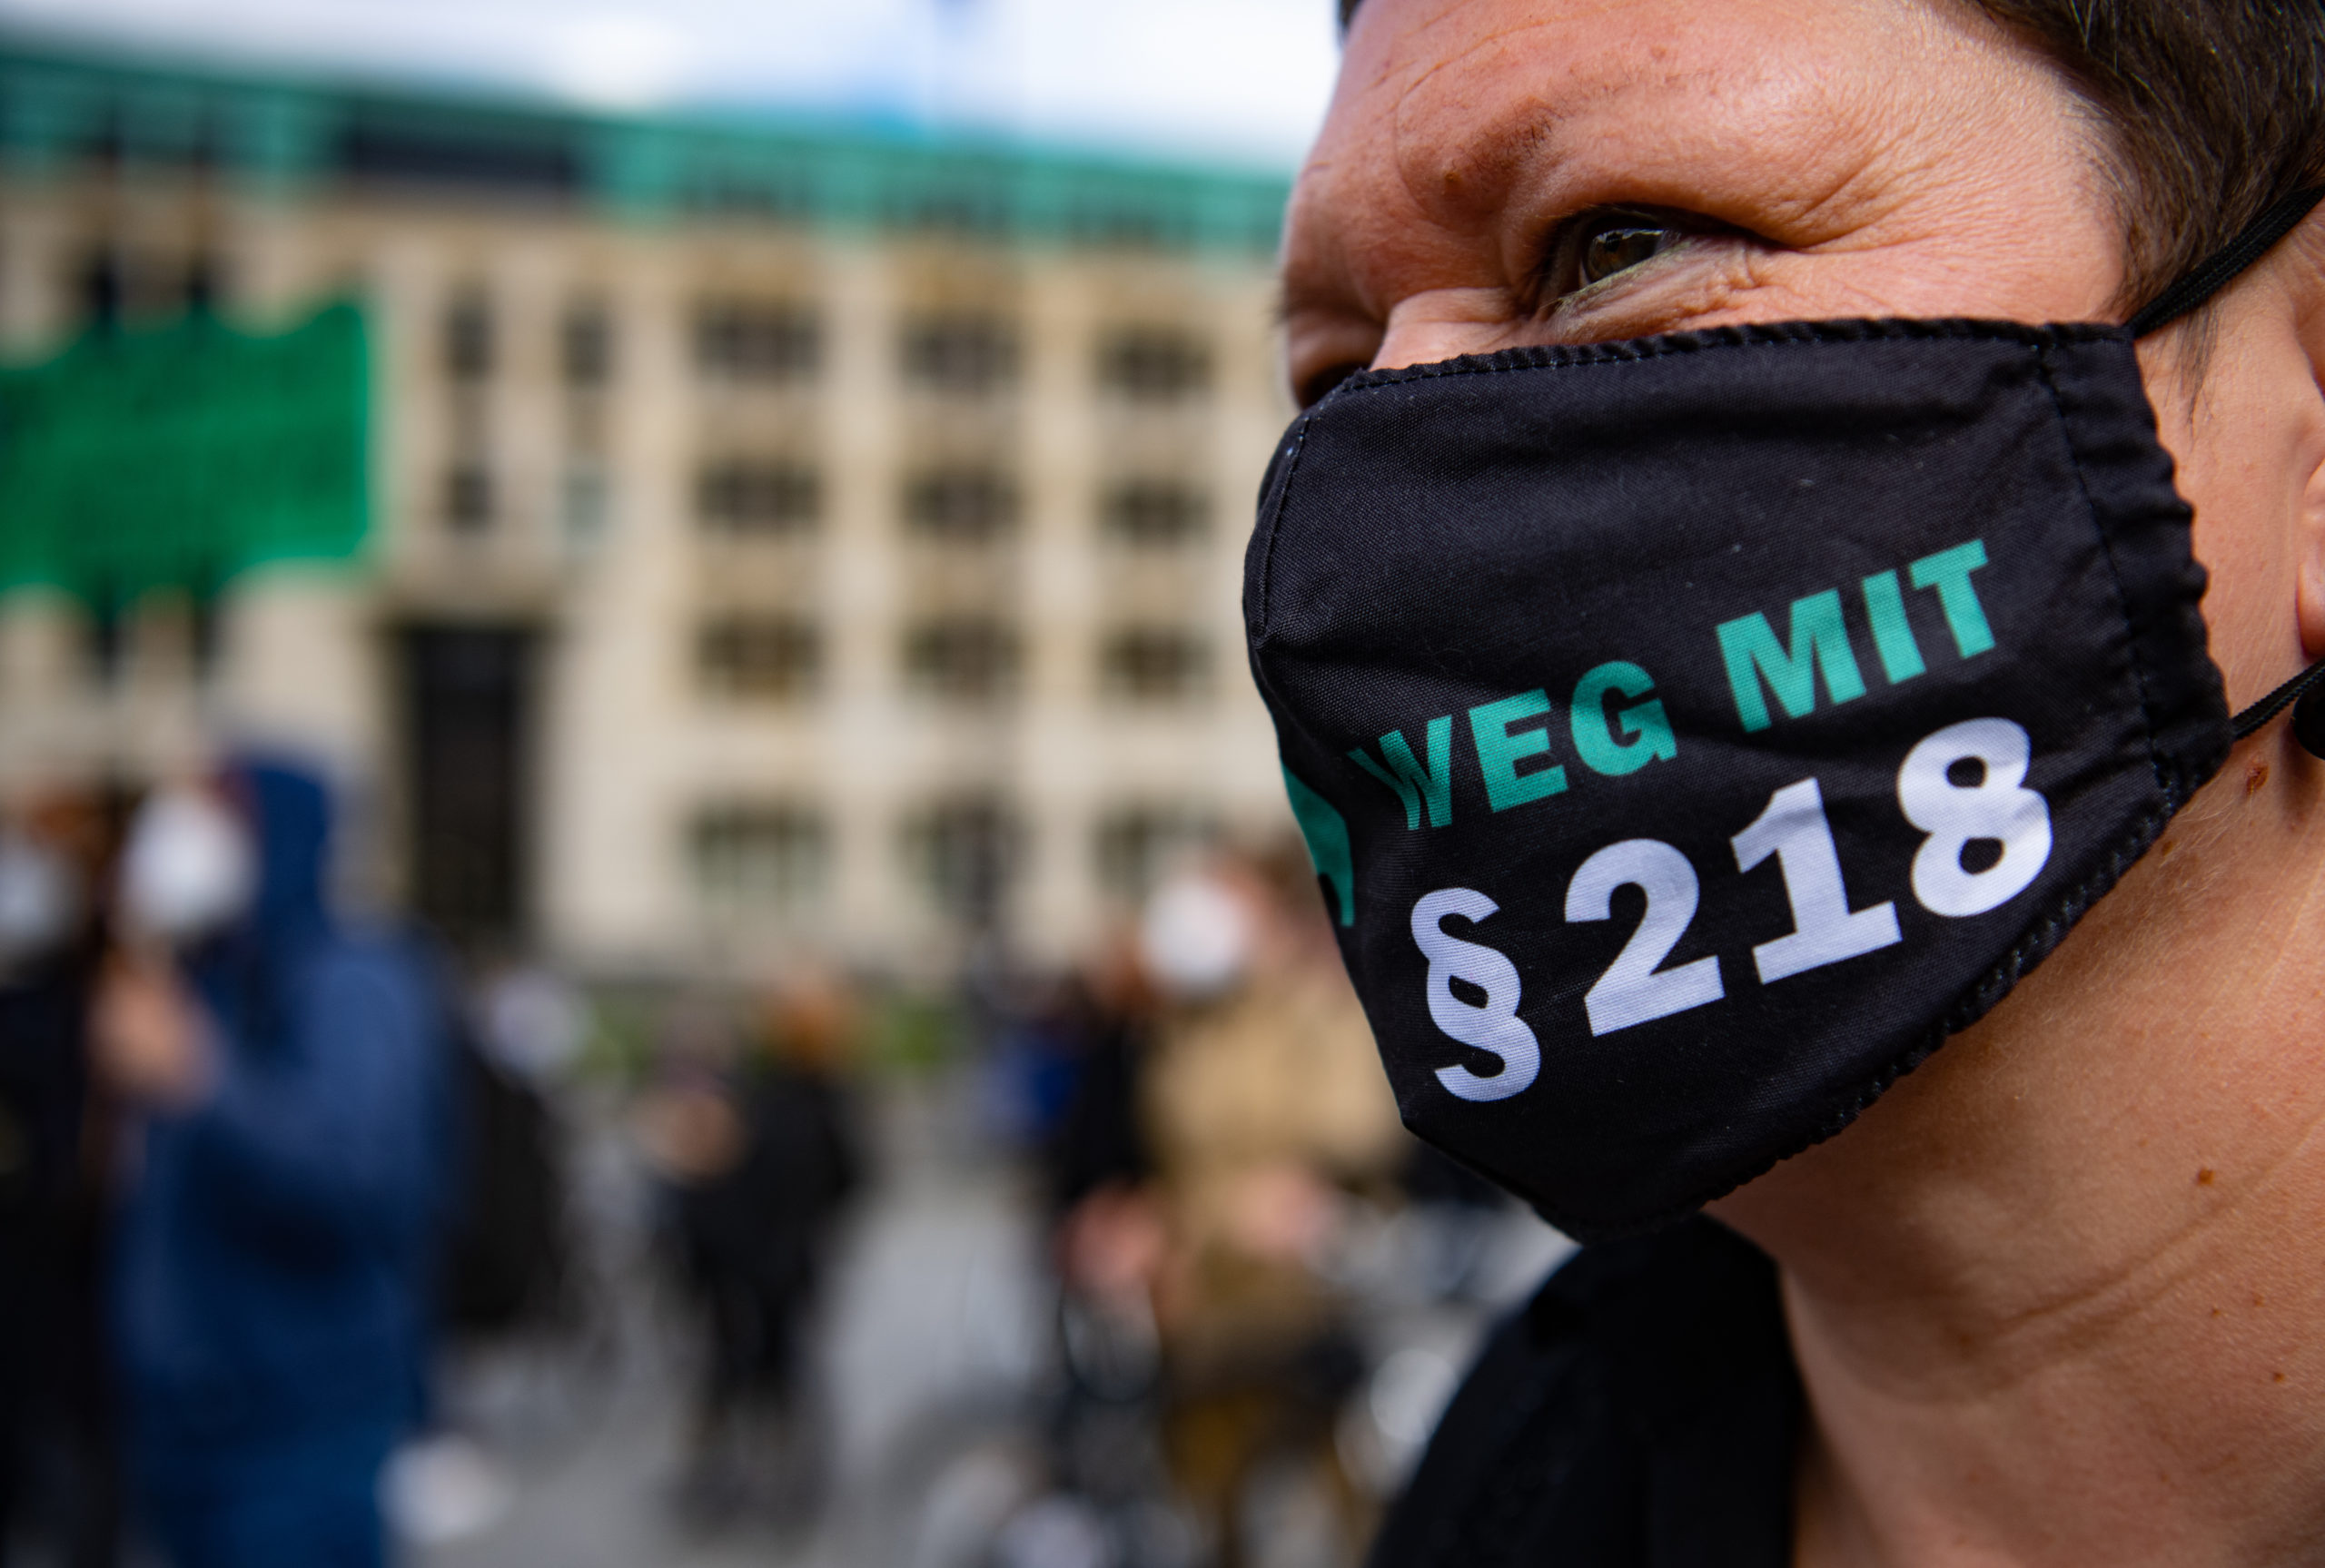 A pro-choice protester in Berlin wears a mask with "away with §218" on it.